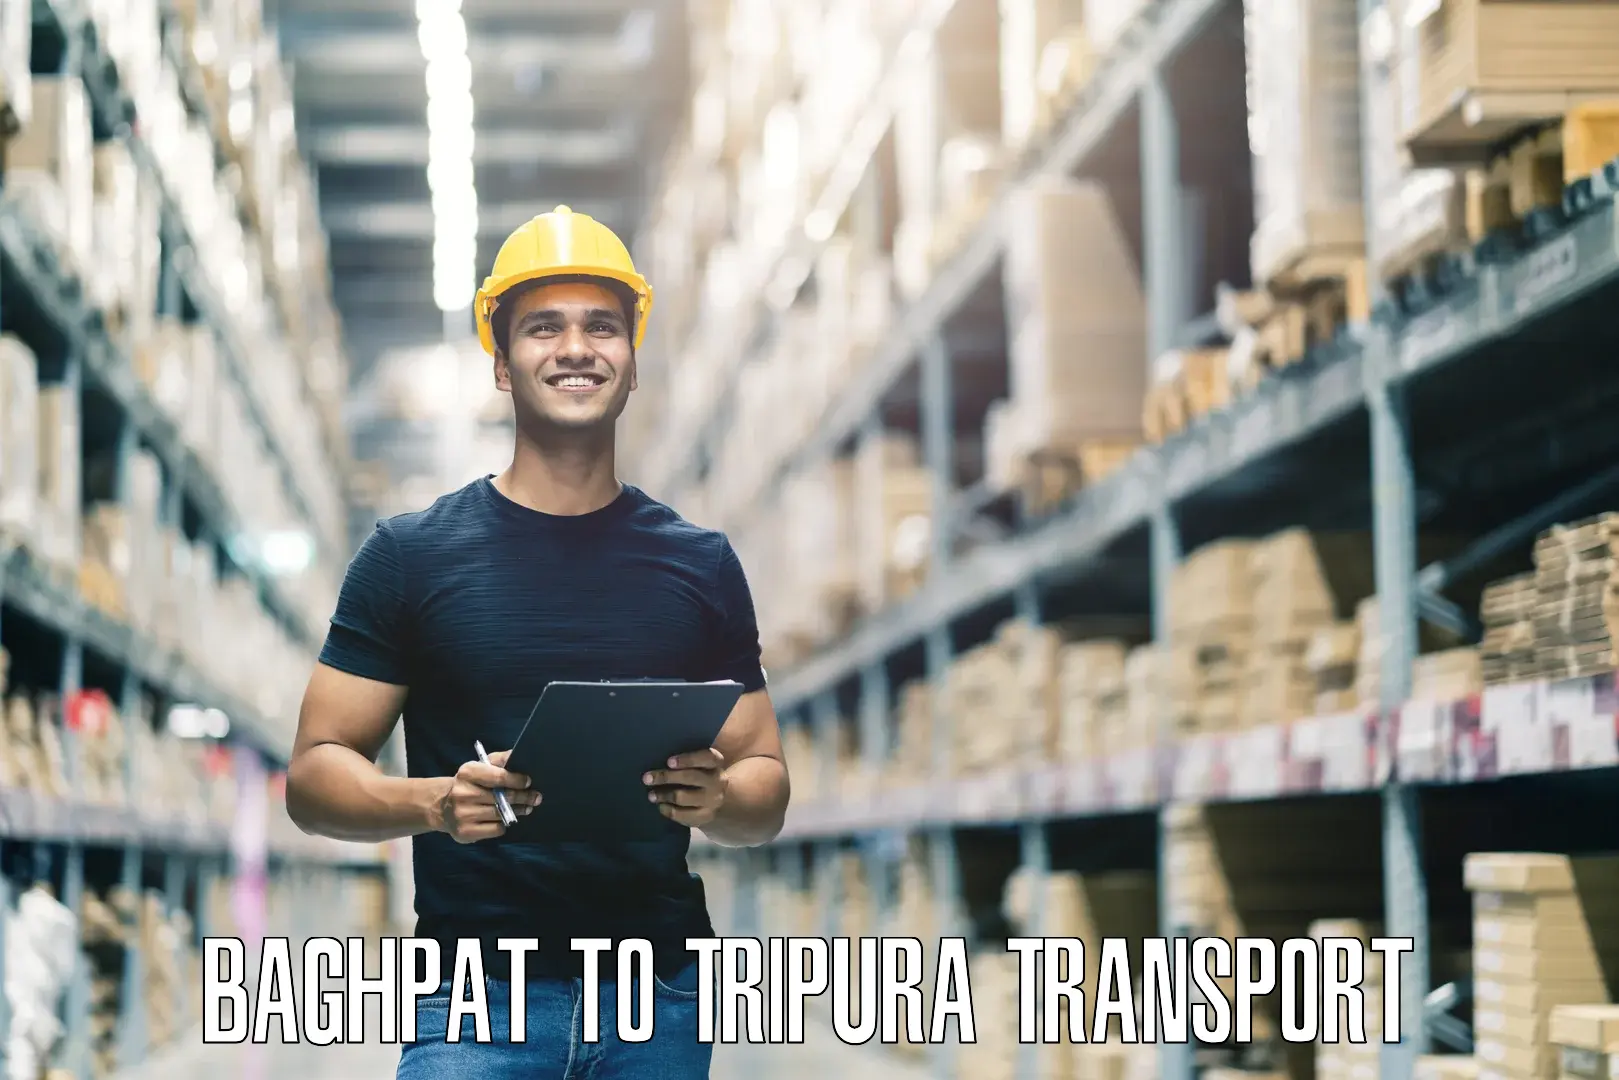 Cargo train transport services Baghpat to Udaipur Tripura